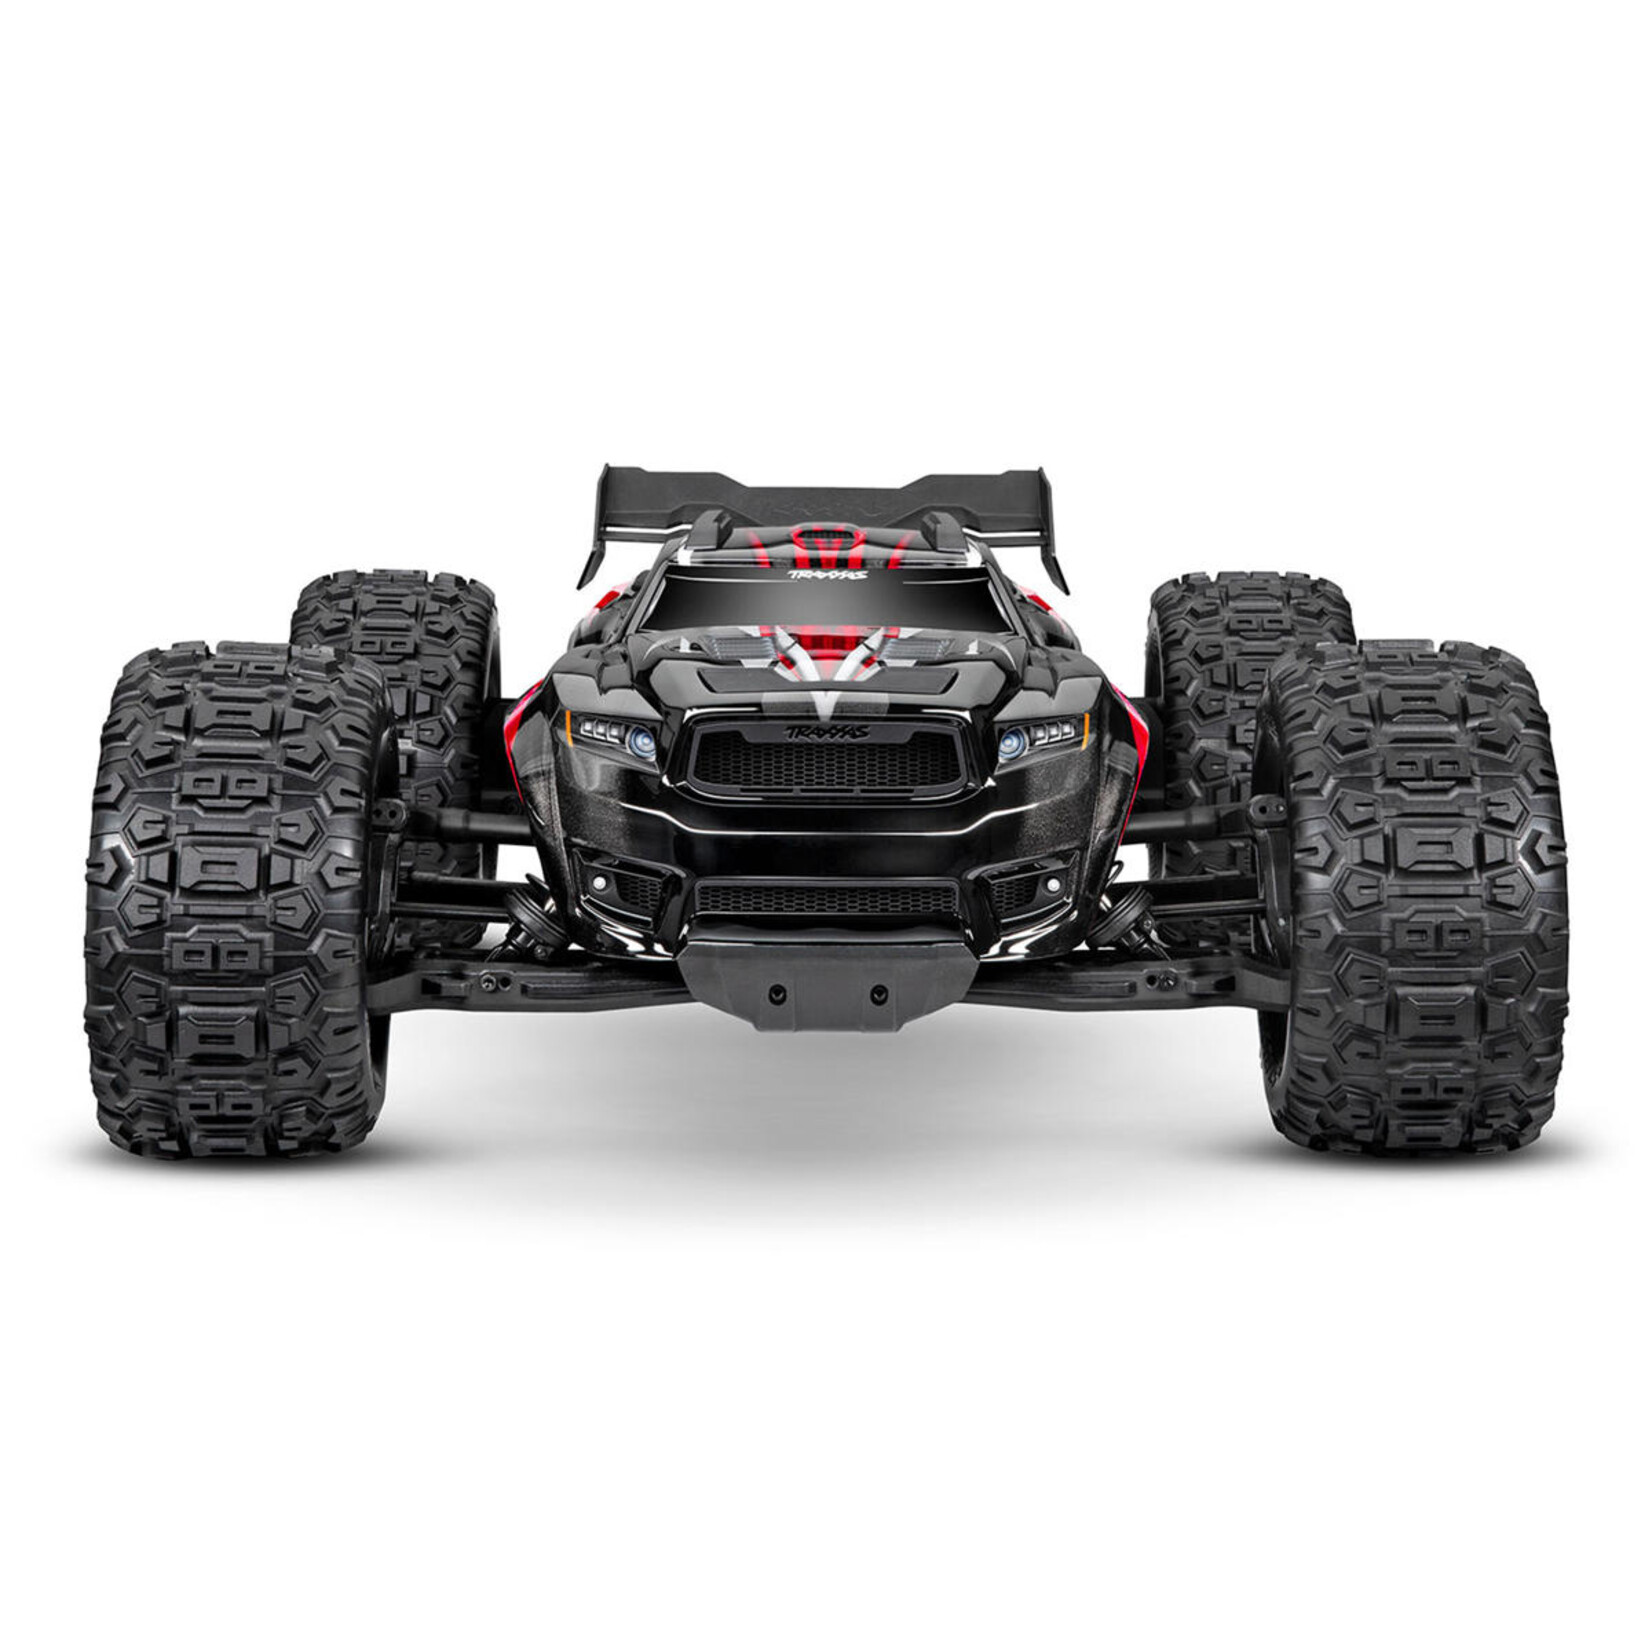 Traxxas Traxxas Sledge RTR 6S 4WD Electric Monster Truck (Red) w/VXL-6s ESC & TQi 2.4GHz Radio #95076-4-RED